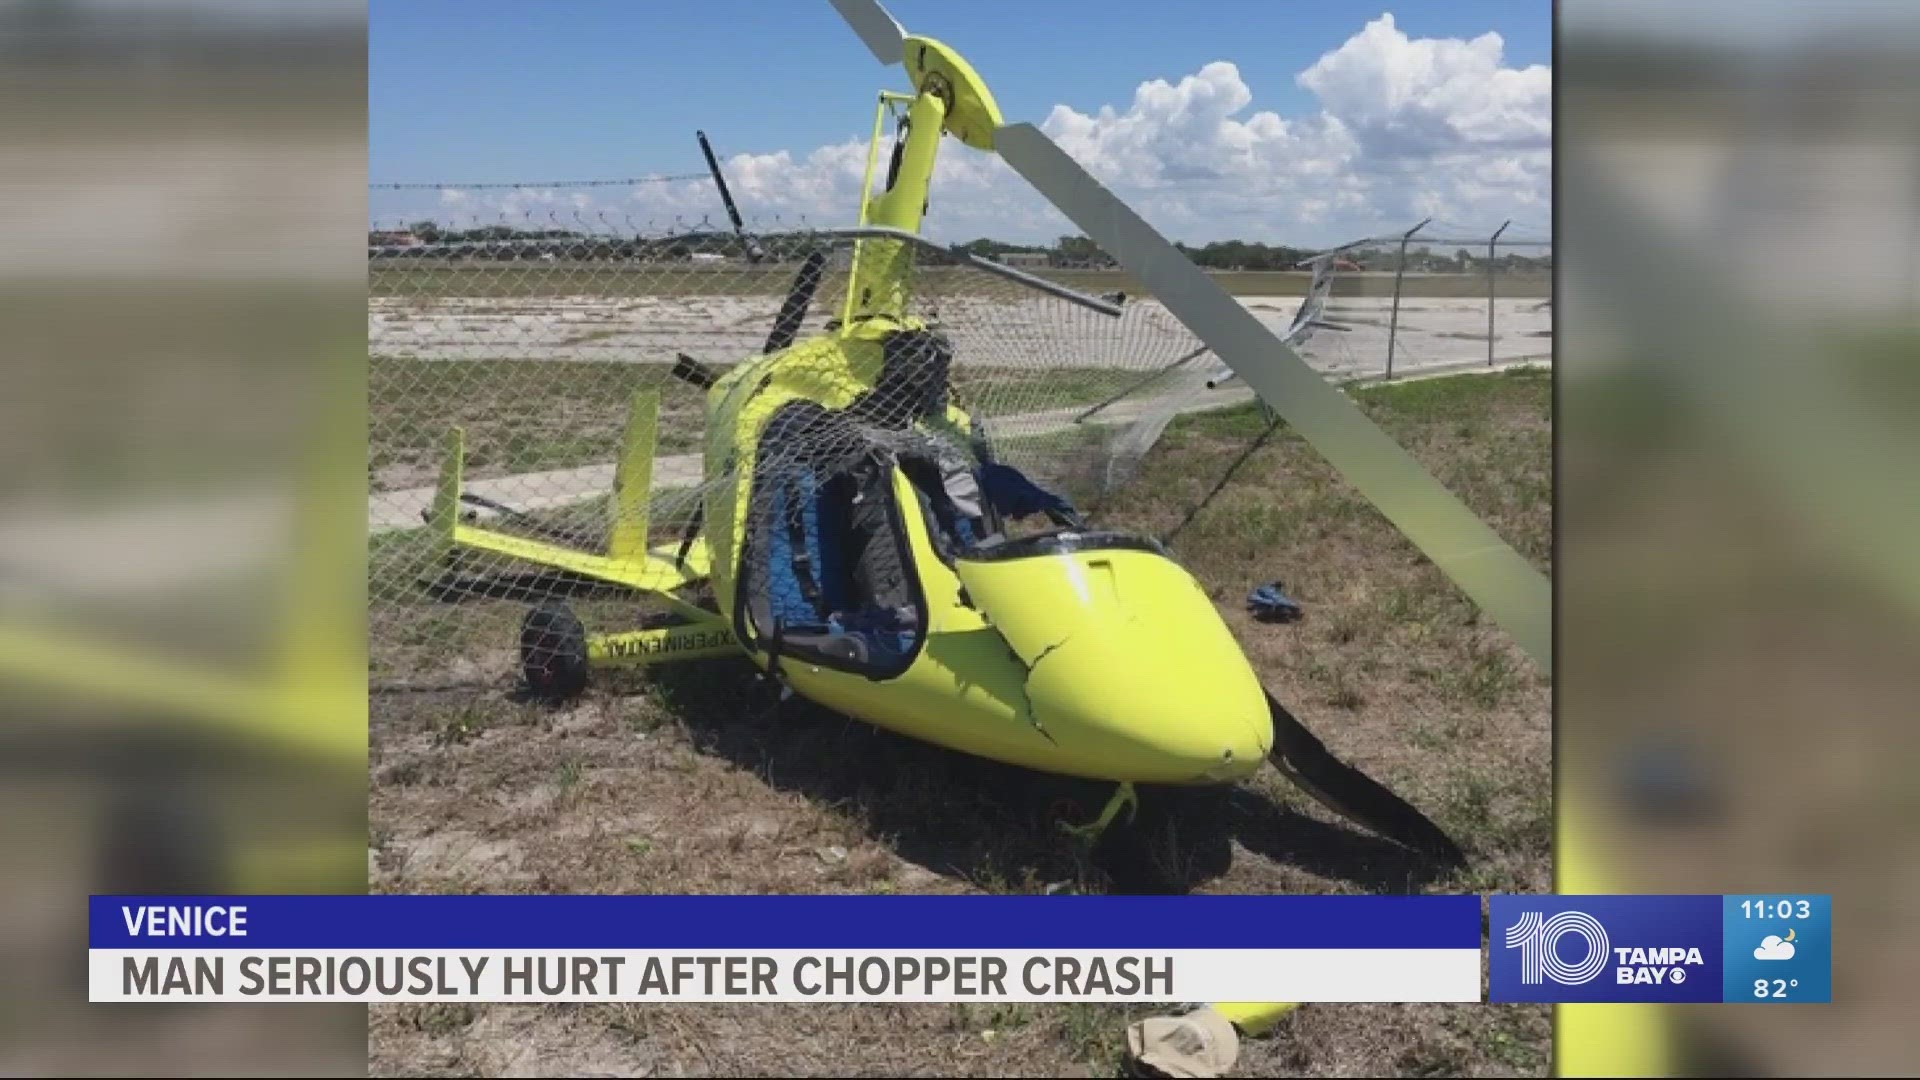 Officials say a call came in around 11:30 a.m. about a small helicopter that crashed into a fence between Venice Municipal Airport and the Festival Grounds.